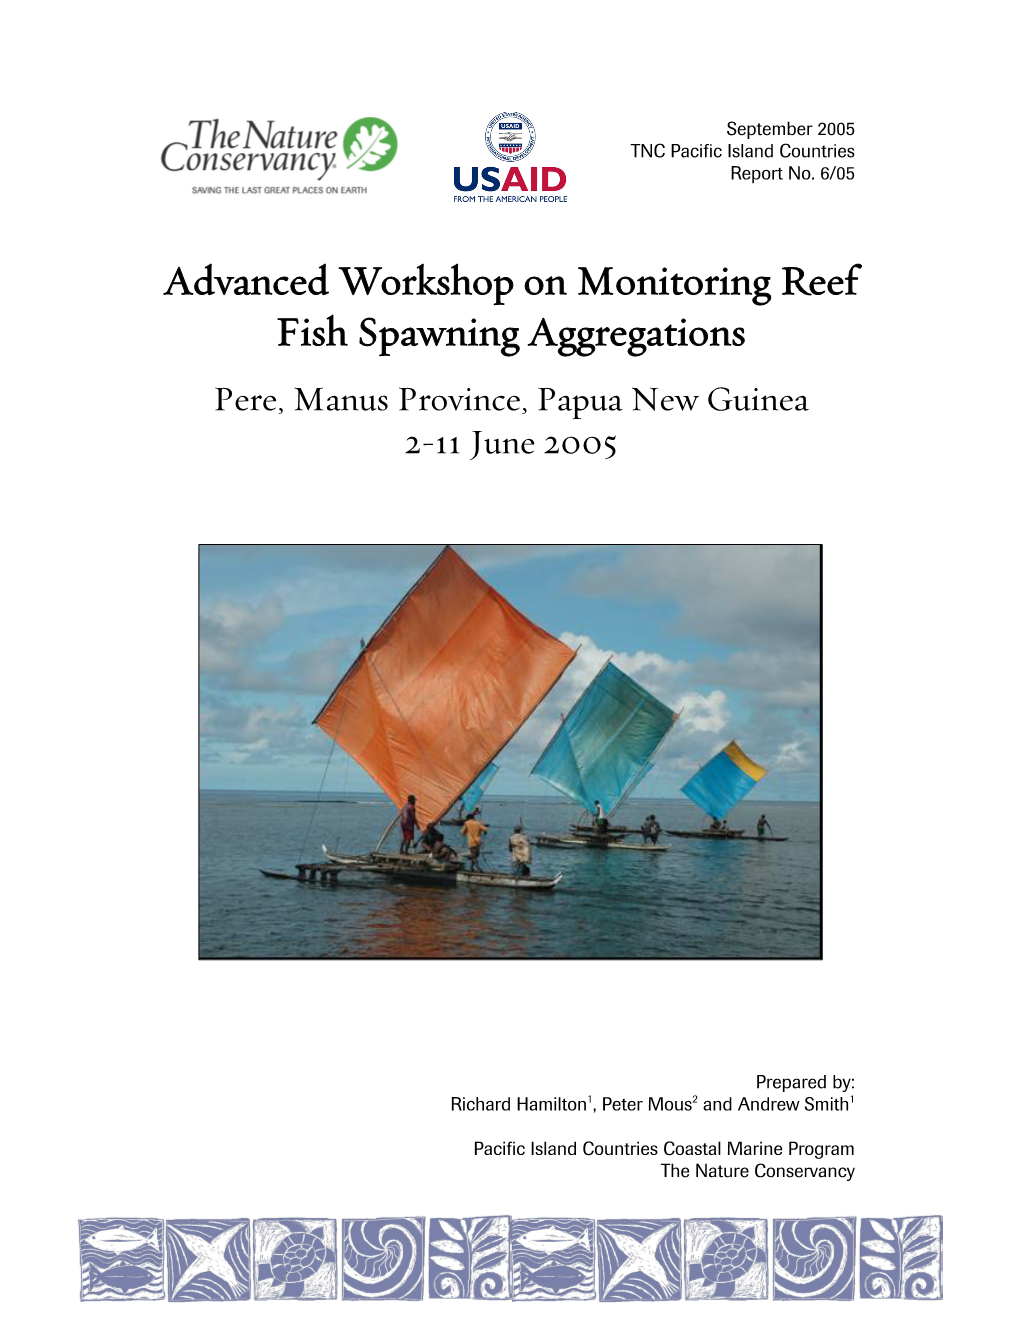 Advanced Workshop on Monitoring Reef Fish Spawning Aggregations